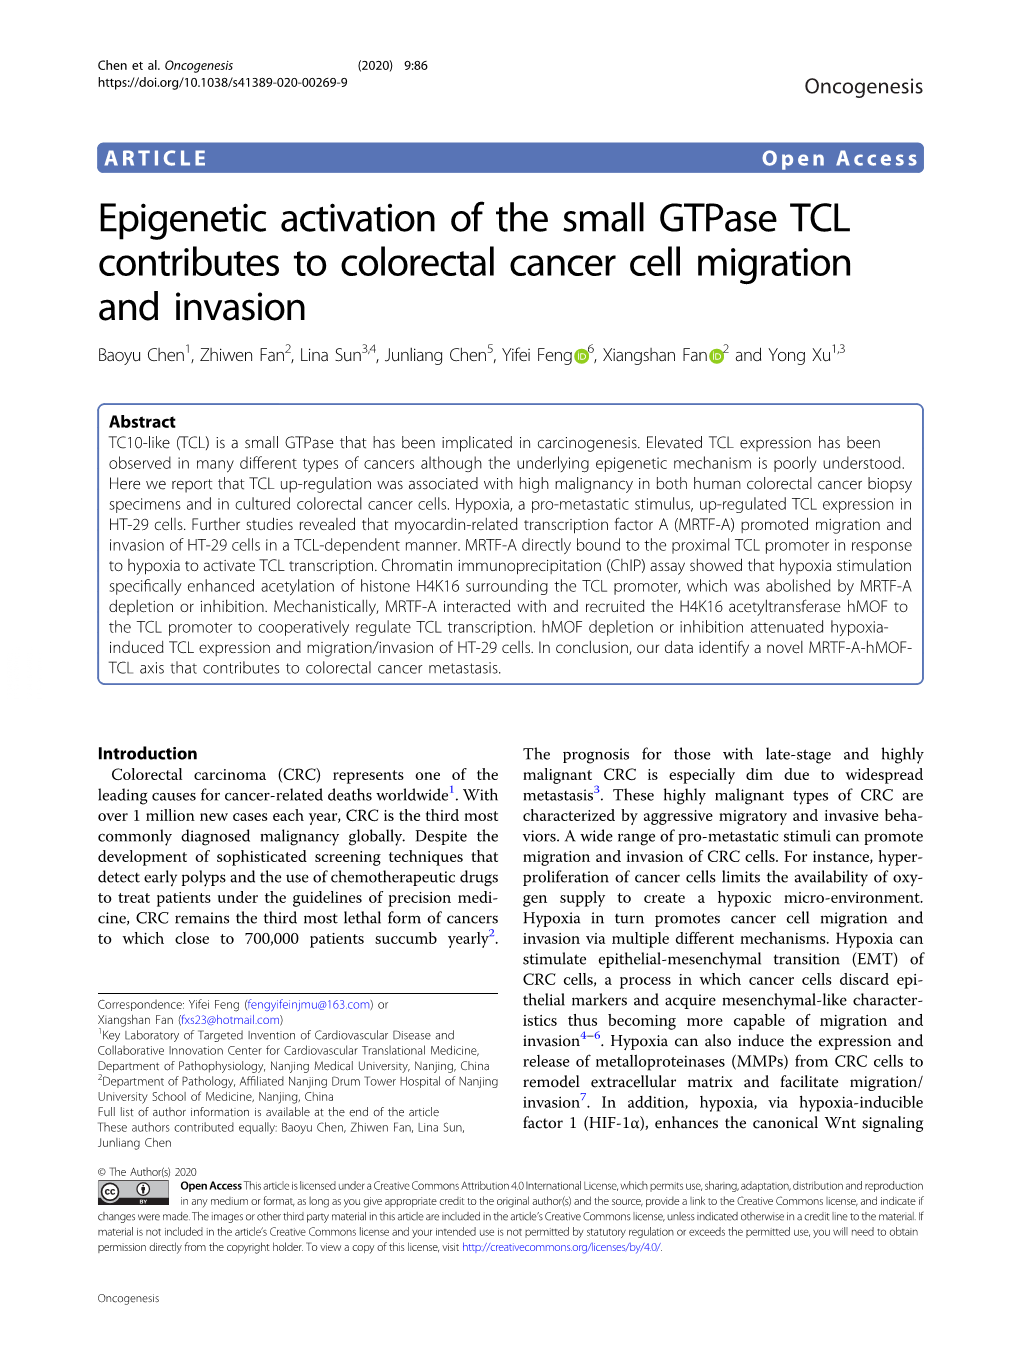 Epigenetic Activation of the Small Gtpase TCL Contributes to Colorectal Cancer Cell Migration and Invasion